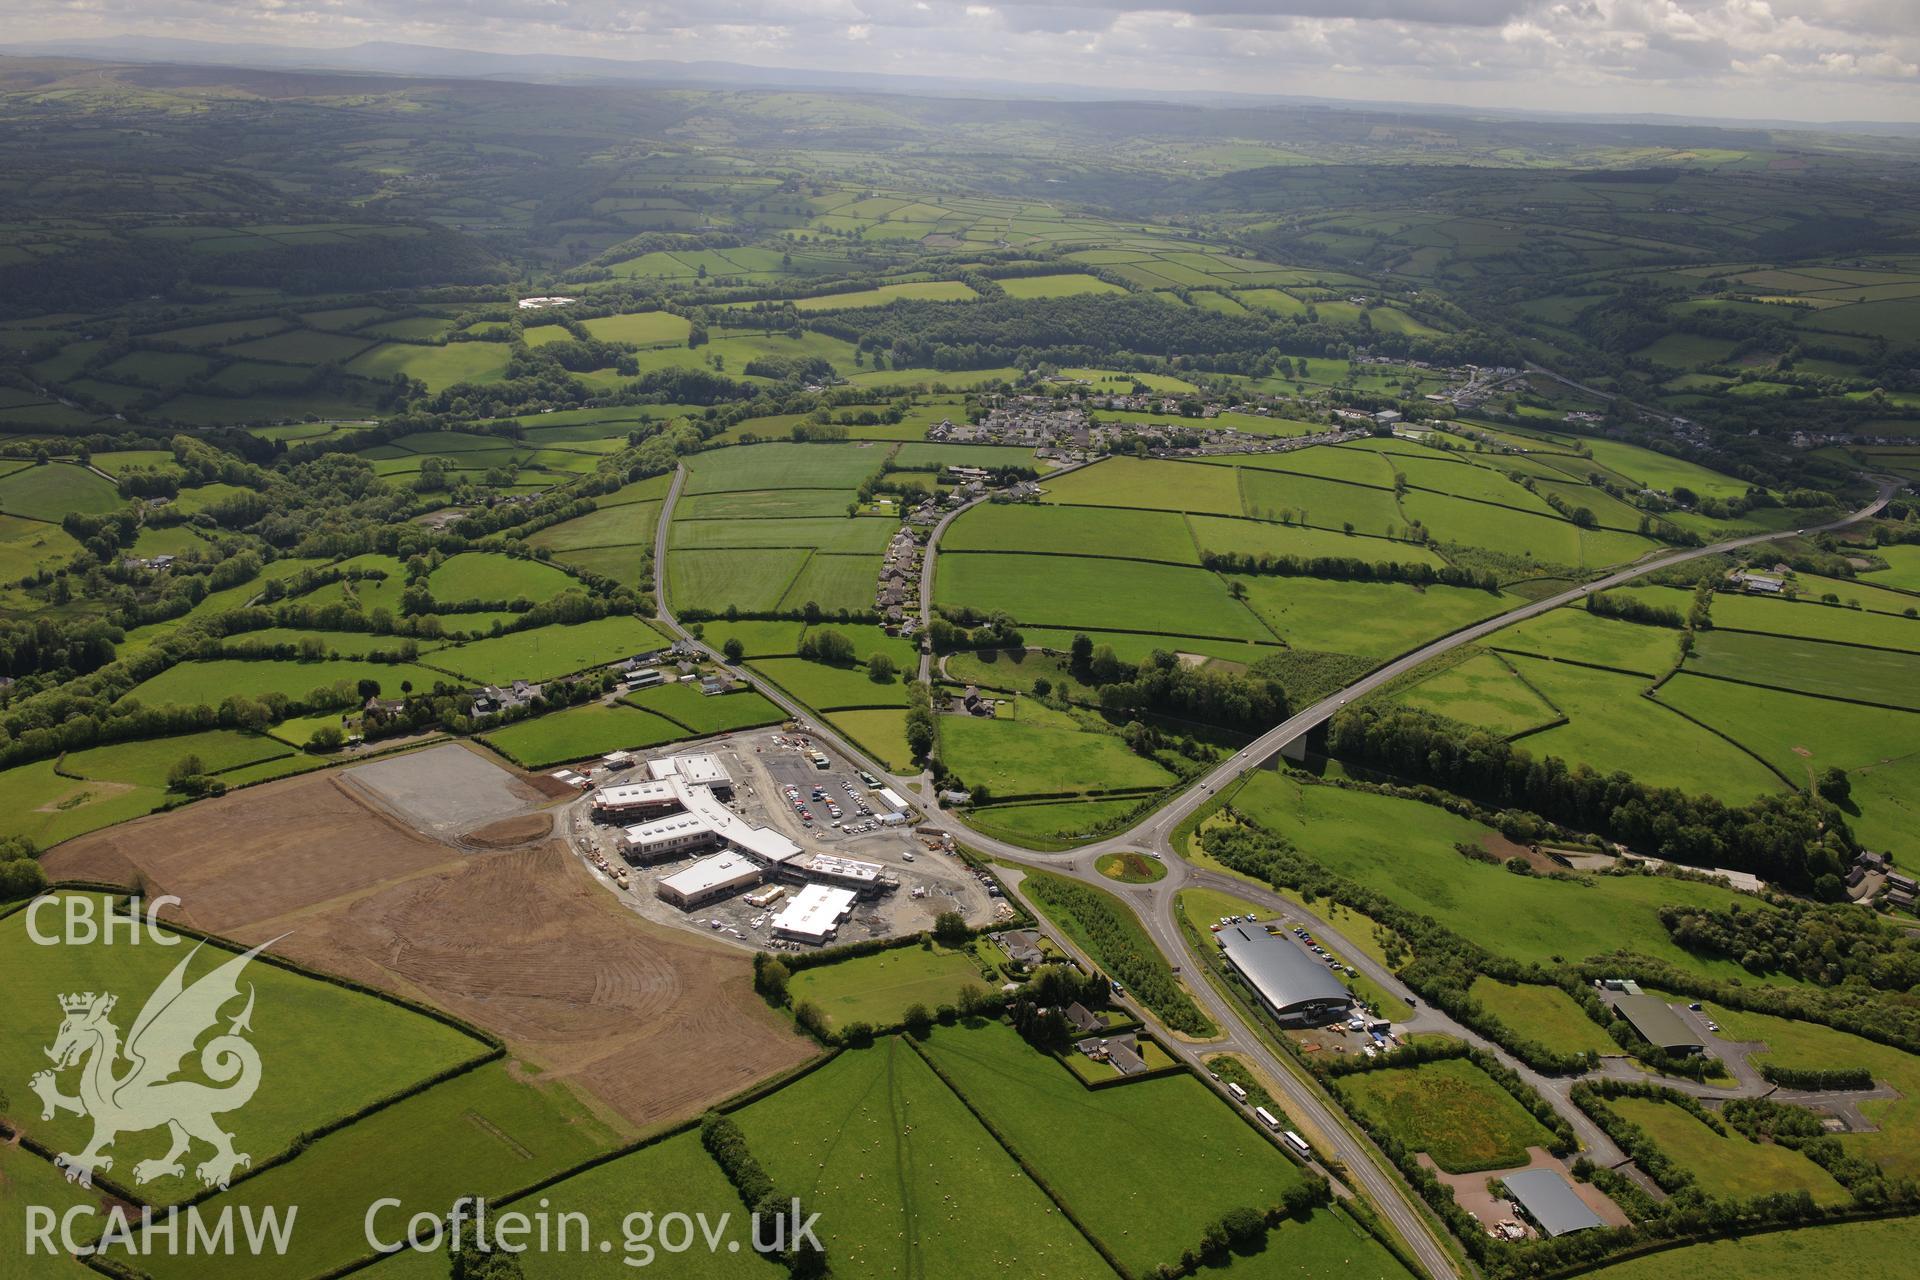 Landscape view showing Ysgol Bro Teifi, Llandysul bypass and Llandysul town. Oblique aerial photograph taken during the Royal Commission's programme of archaeological aerial reconnaissance by Toby Driver on 3rd June 2015.